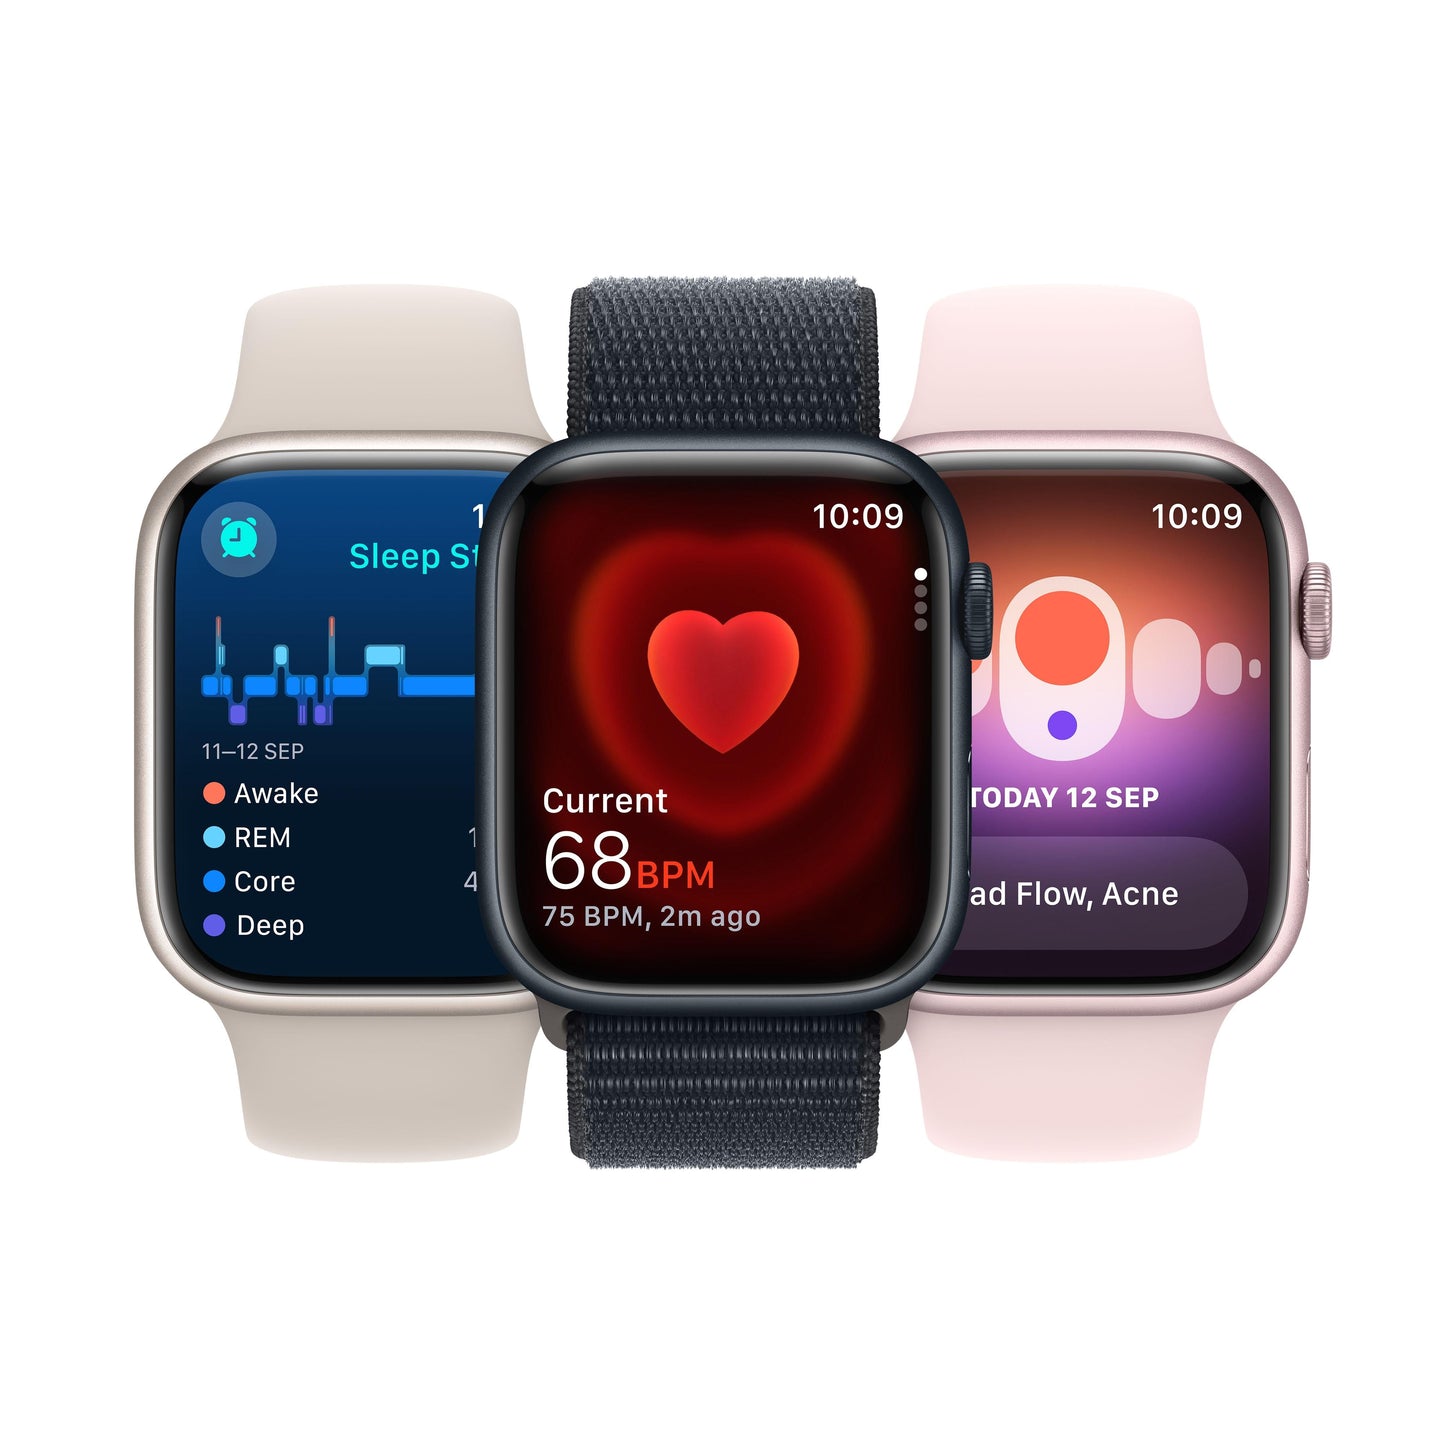 Apple Watch Series 9 GPS 41mm (PRODUCT)RED Alum Case w/ (PRODUCT)RED Sport Band - S/M